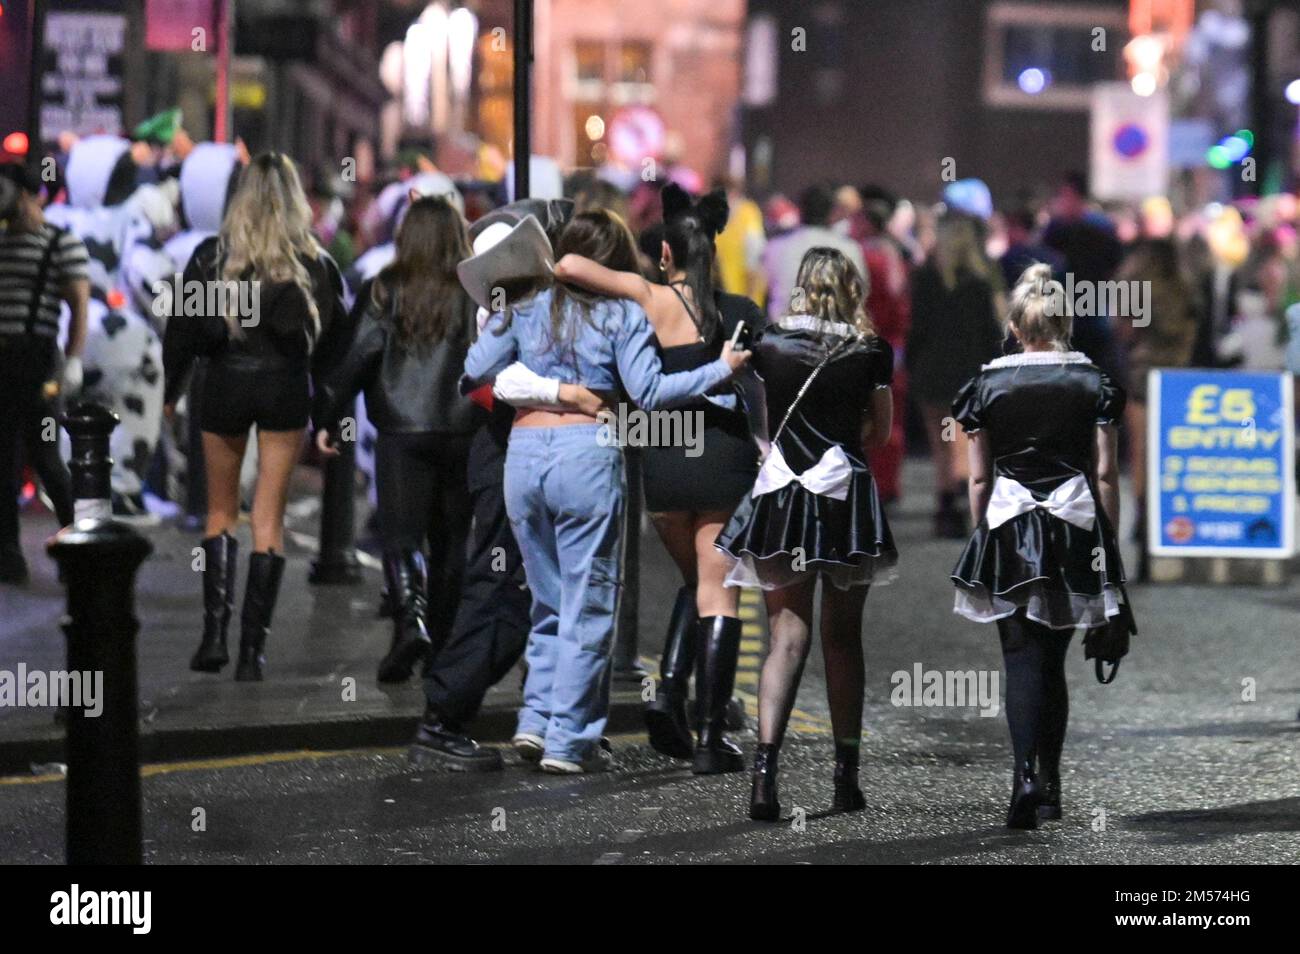 King Street, Wigan, December 26th 2022. - Revellers in various fancy dress outfits from traffic cones to Beetlejuice to sexy Peaky Blinders have hit the streets of Wigan on Boxing Day evening in the annual infamous event that is open to any ideas with no theme. Partygoers dressed in hilarious outfits hit King Street and Wallgate which houses many nightclubs and bars. Greater Manchester Police watched on as the mayhem ensued. Credit: Ben Formby/Alamy Live News Stock Photo